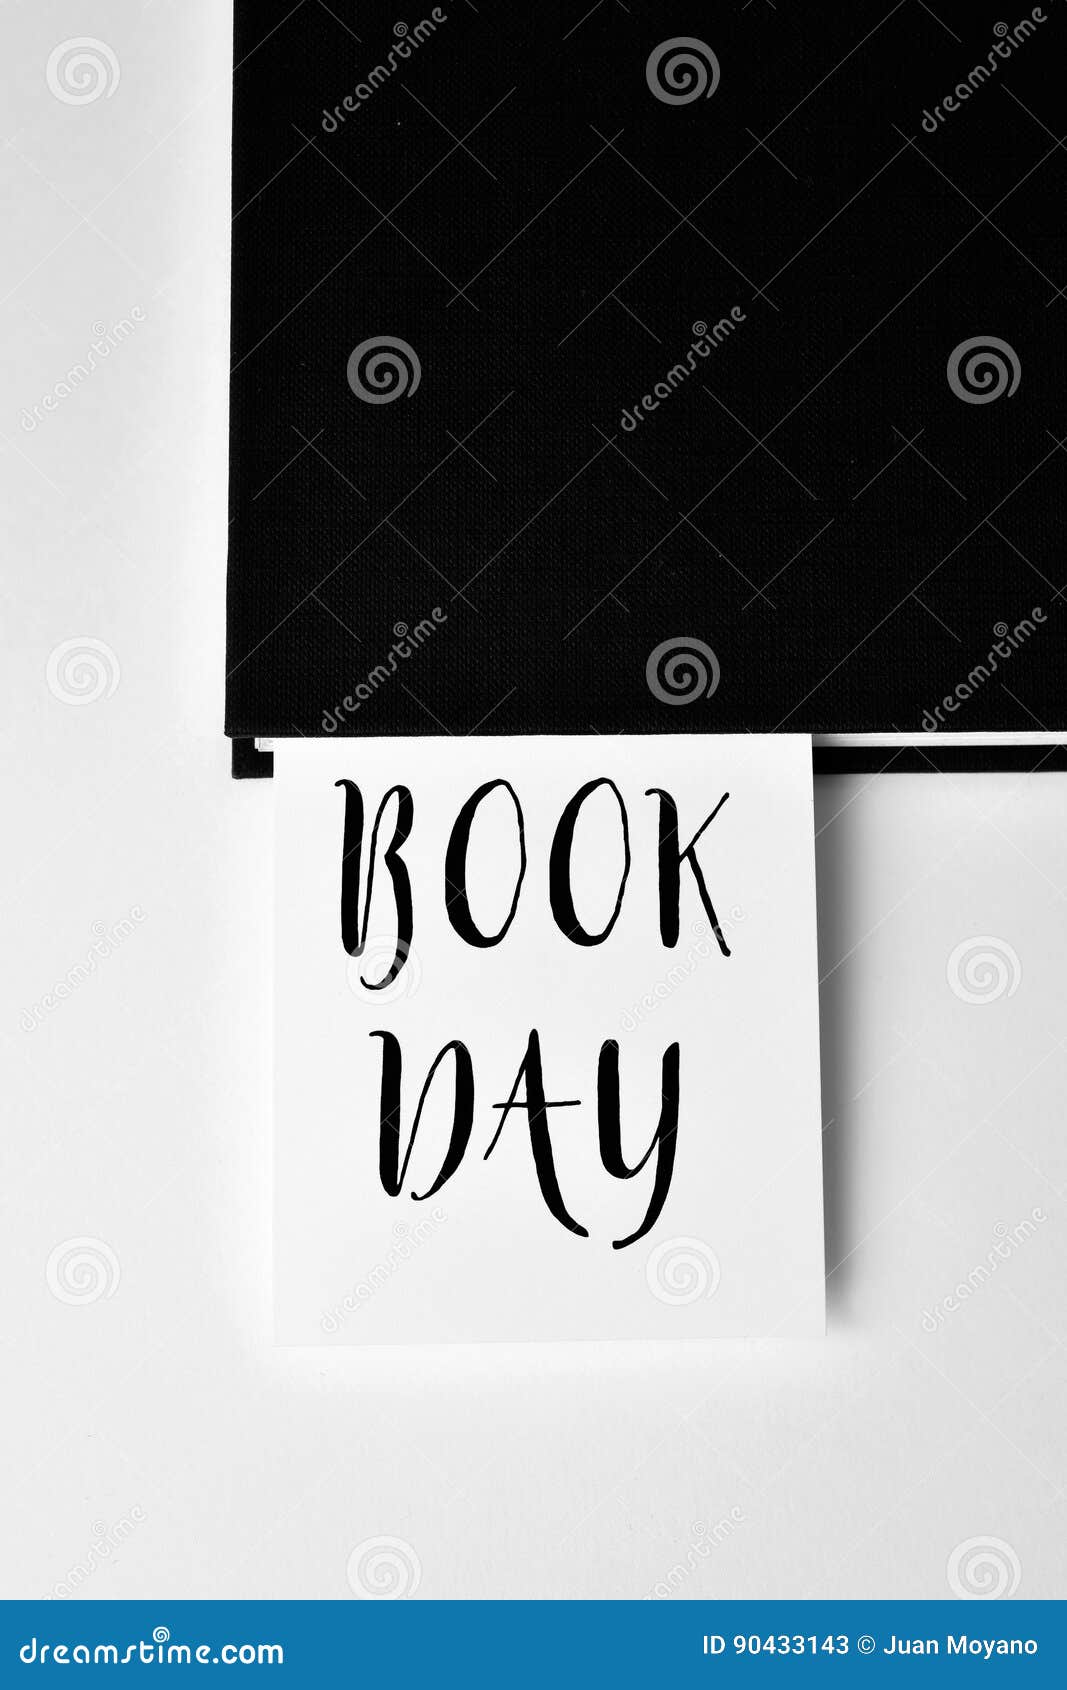 book and text book day